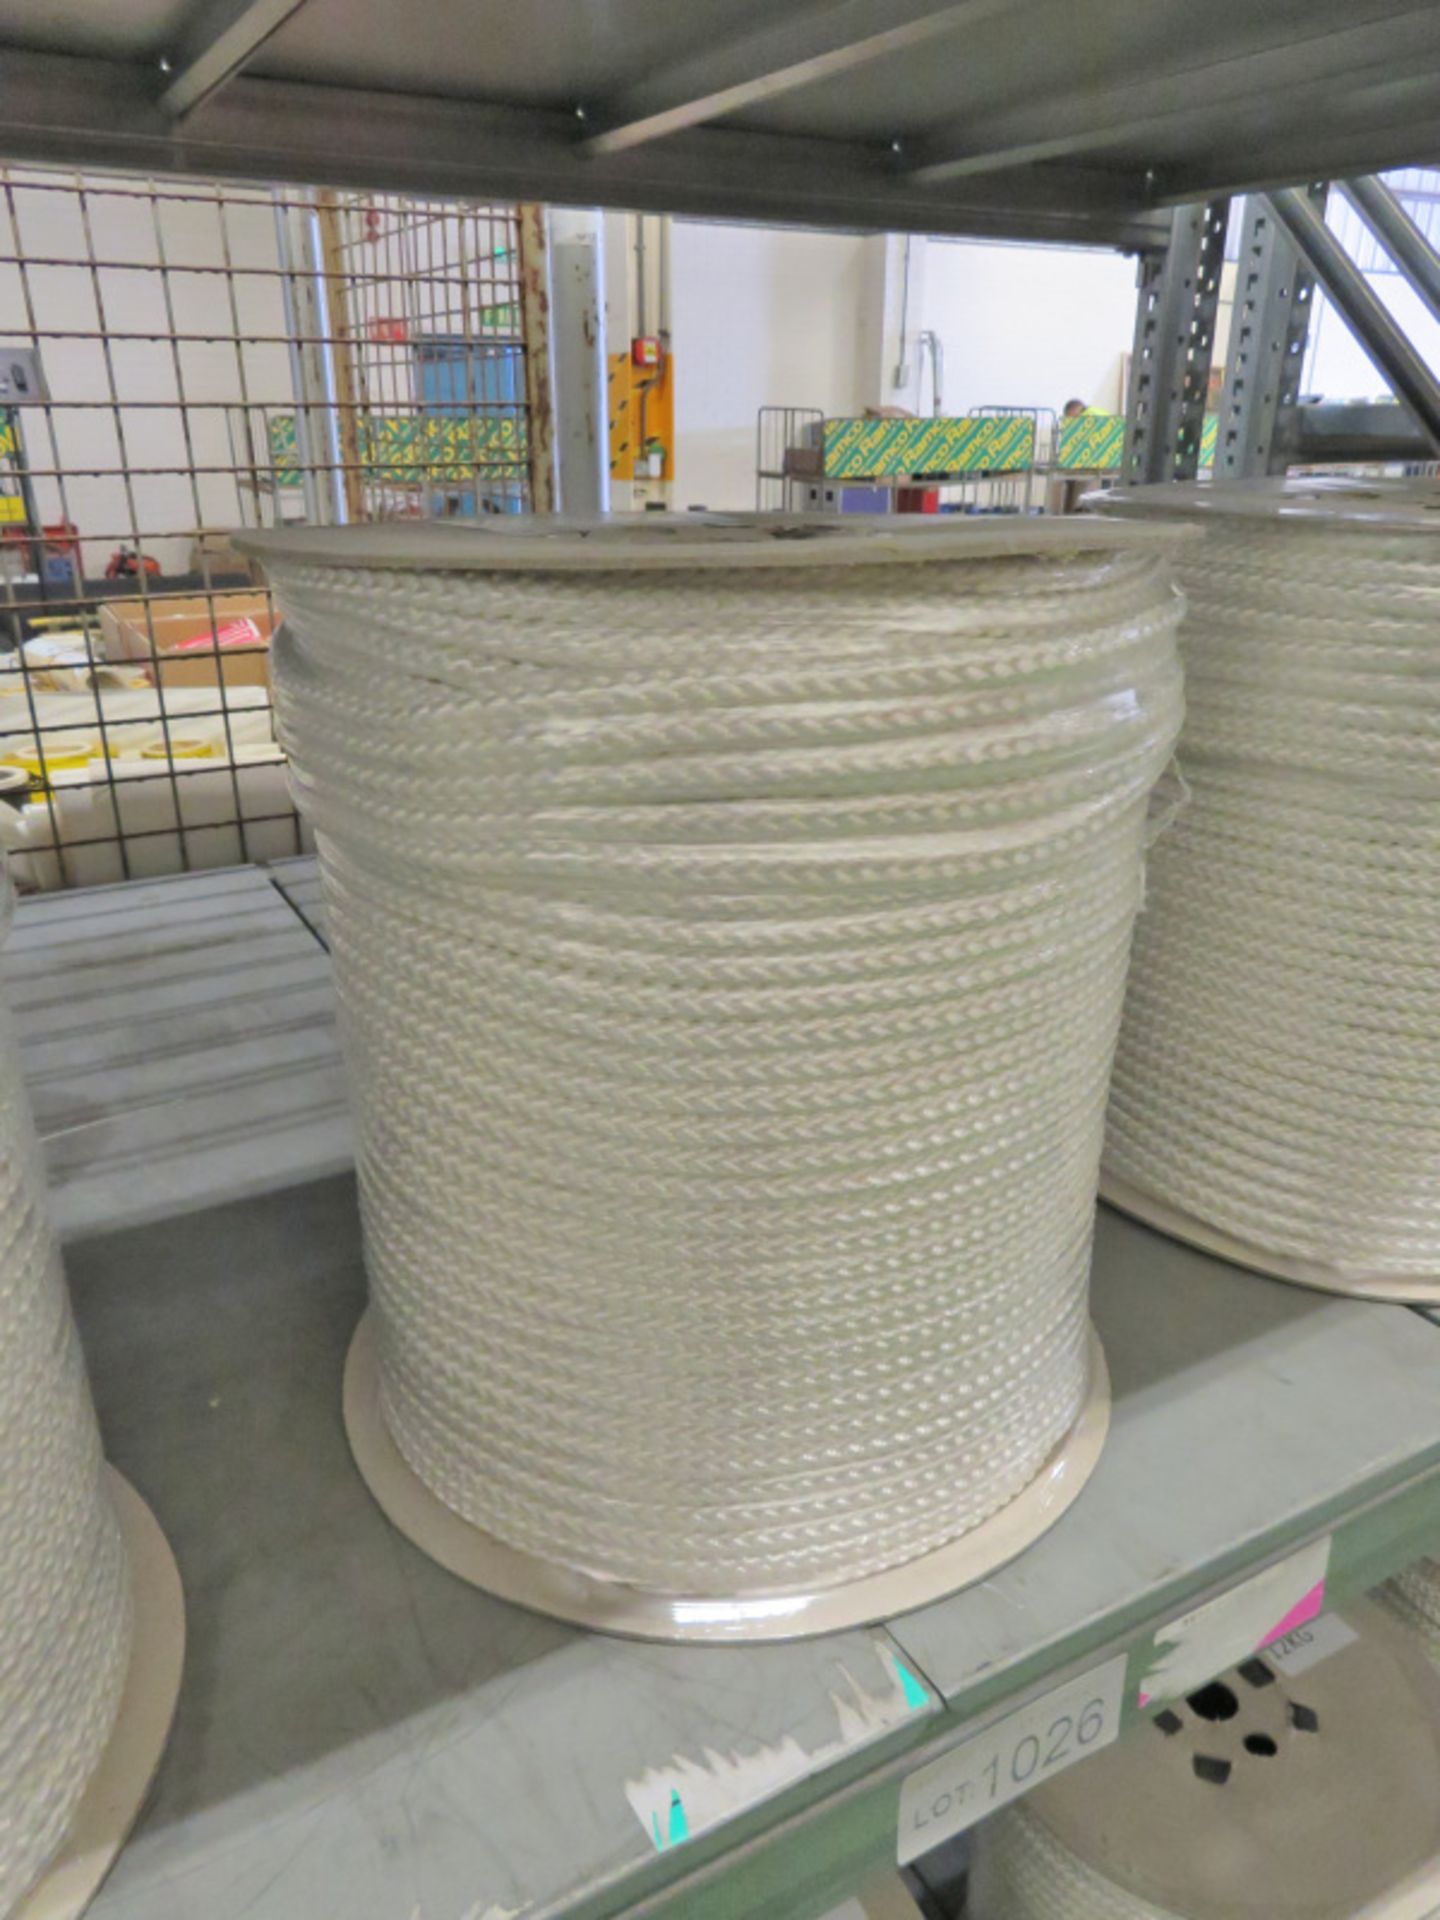 Fibrous rope 22 - 12kg each coil - NSN 4020-99-120-8692 - Image 2 of 2